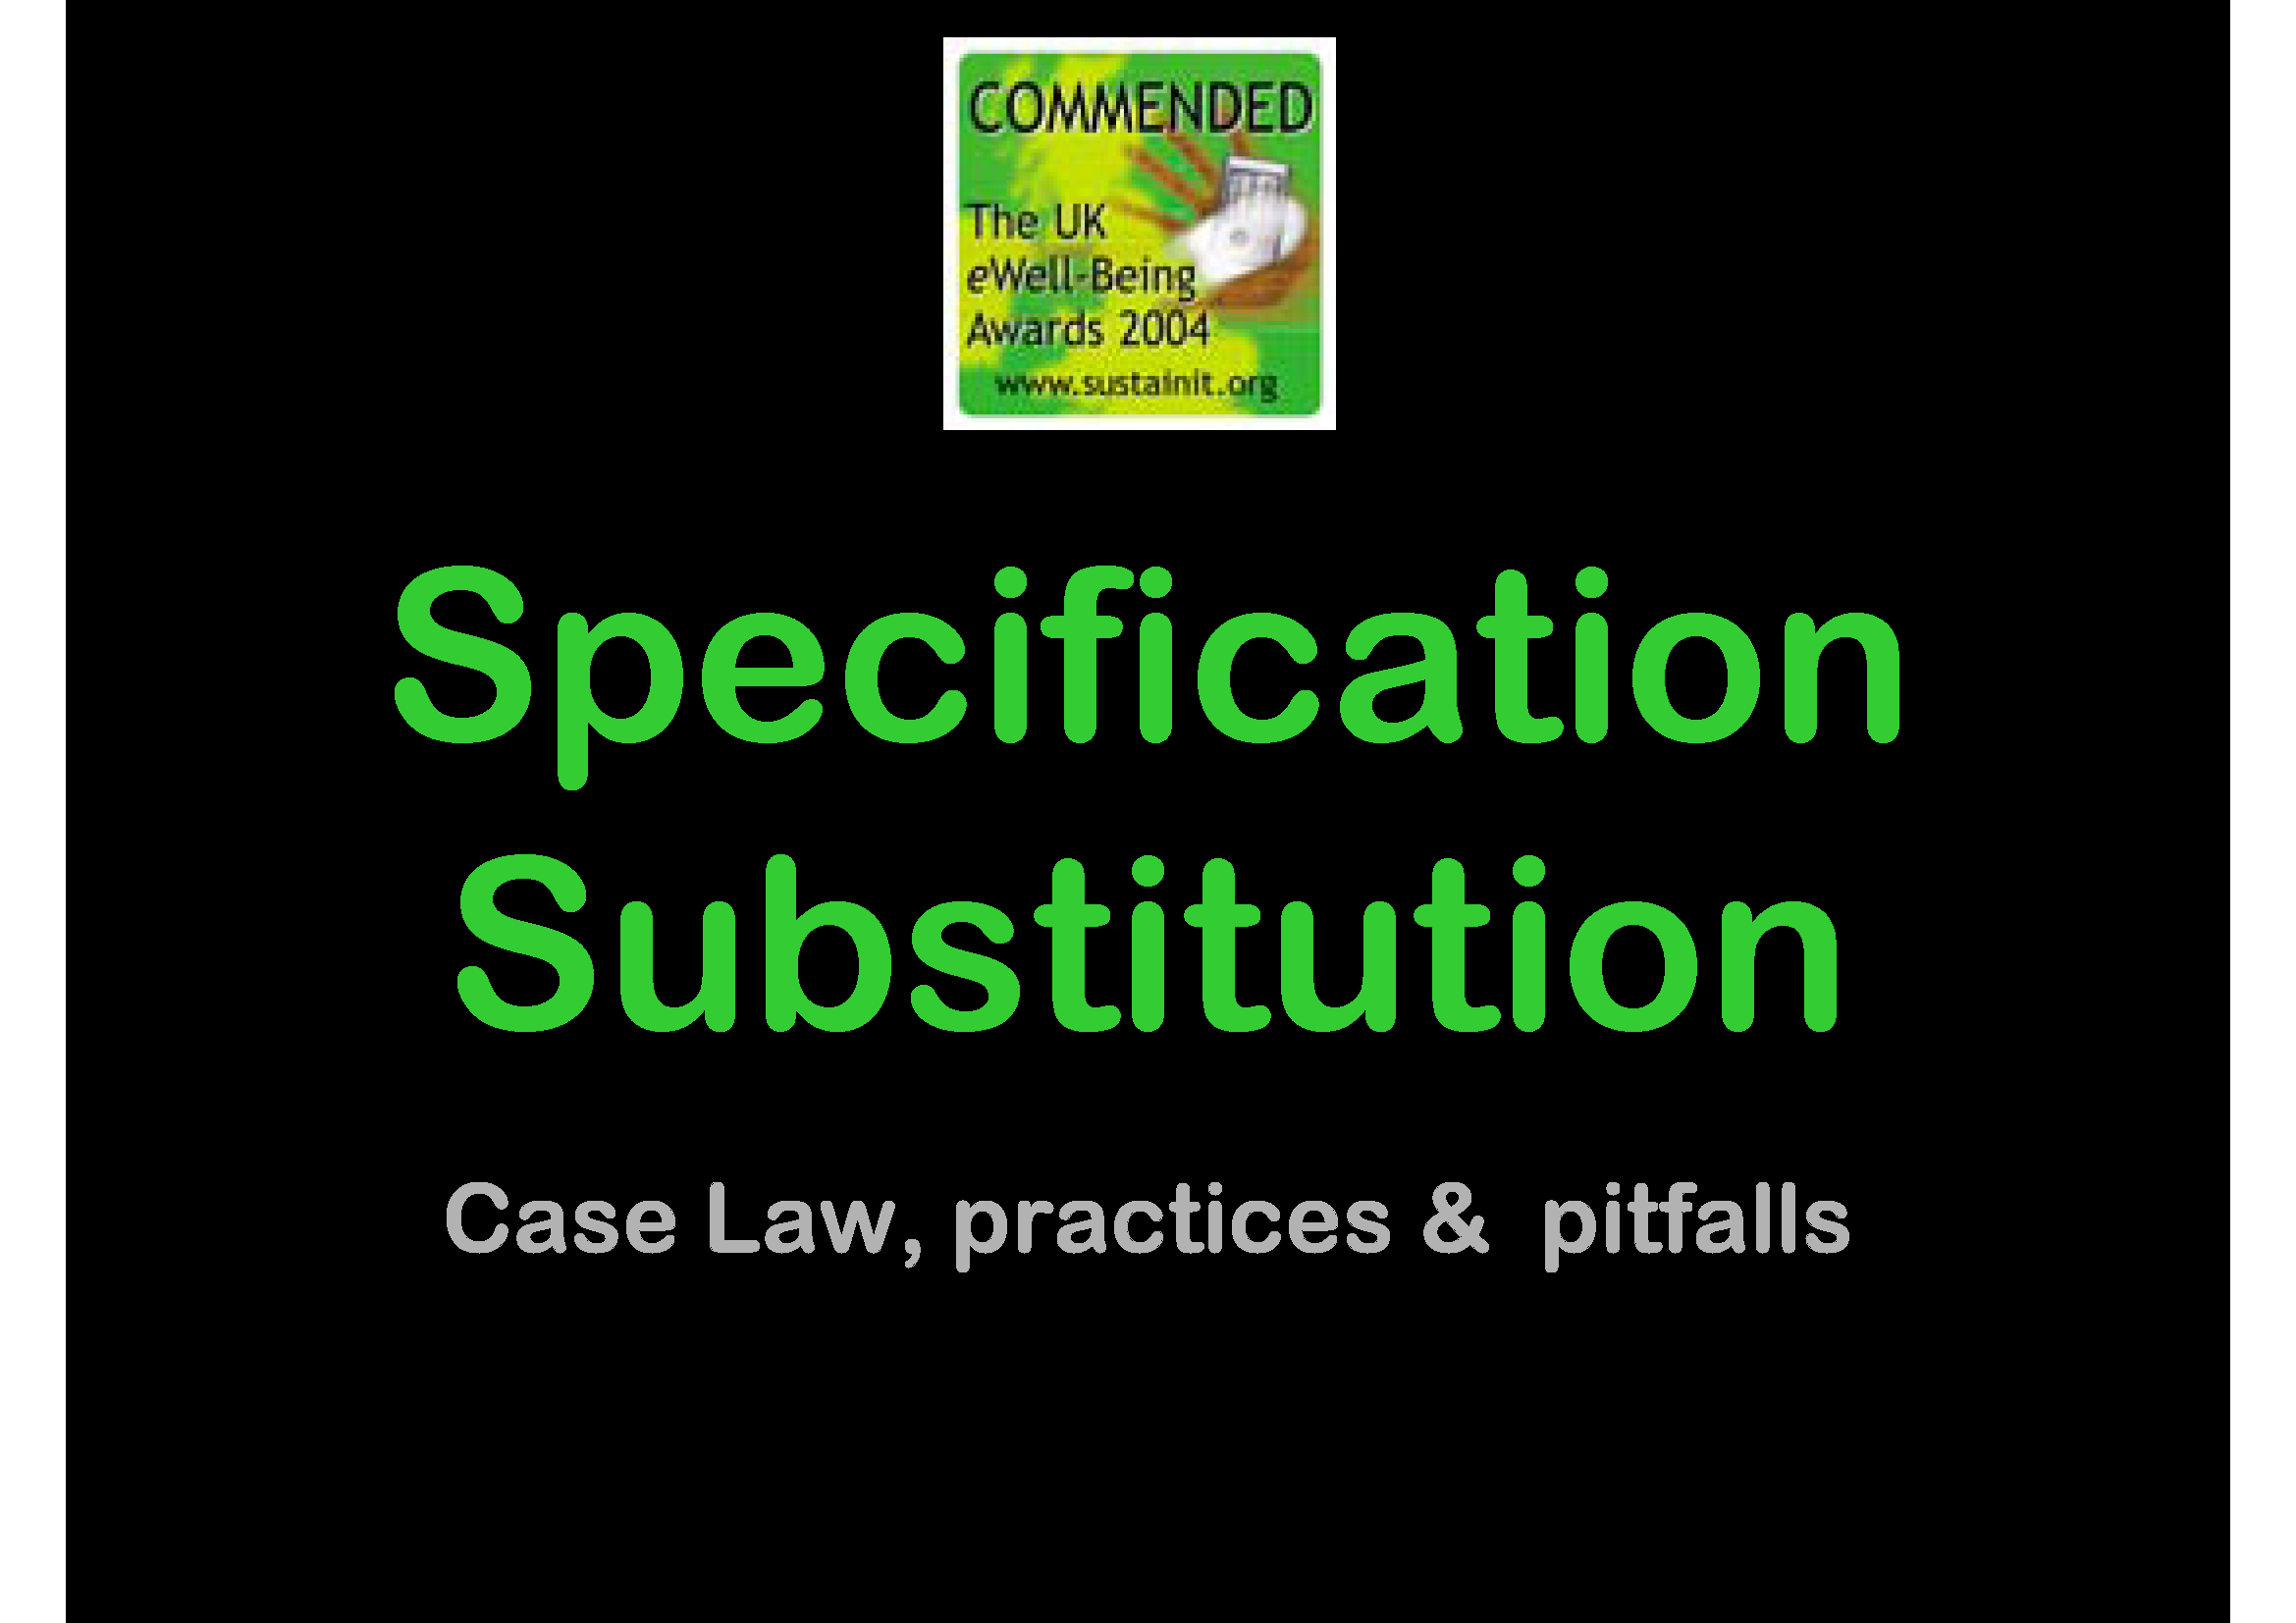 SpecificationSubstitution